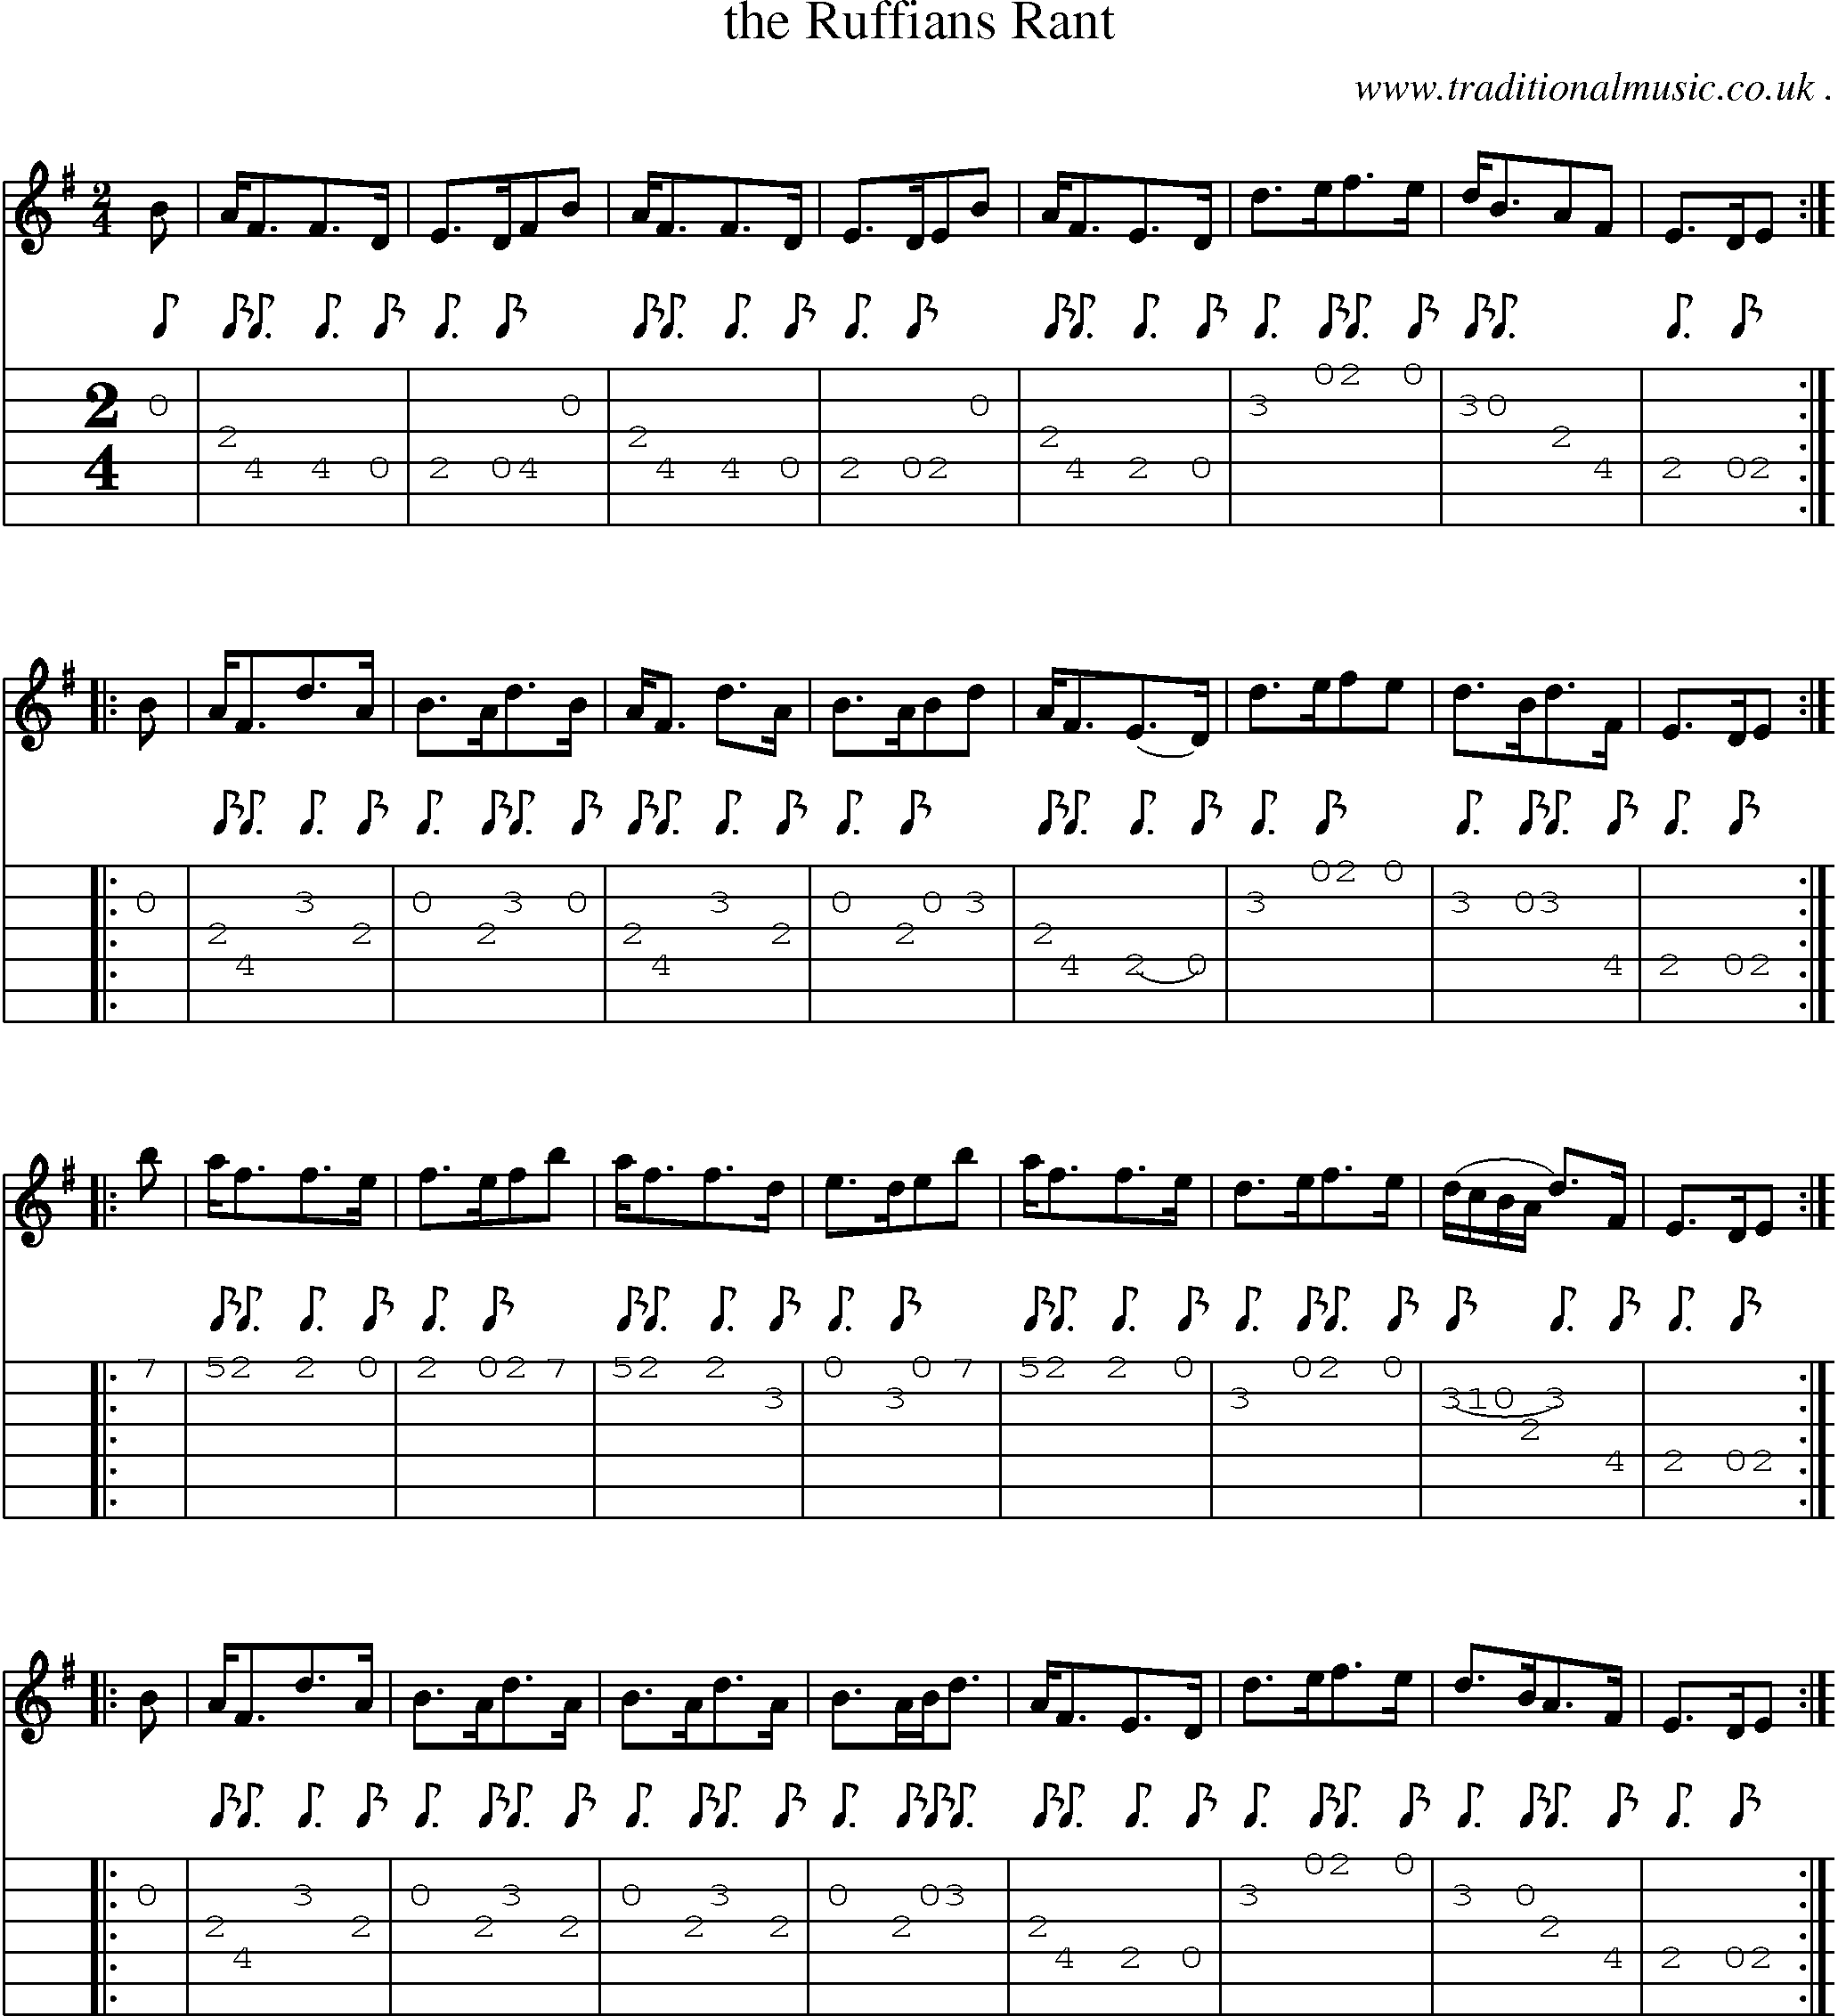 Sheet-Music and Guitar Tabs for The Ruffians Rant